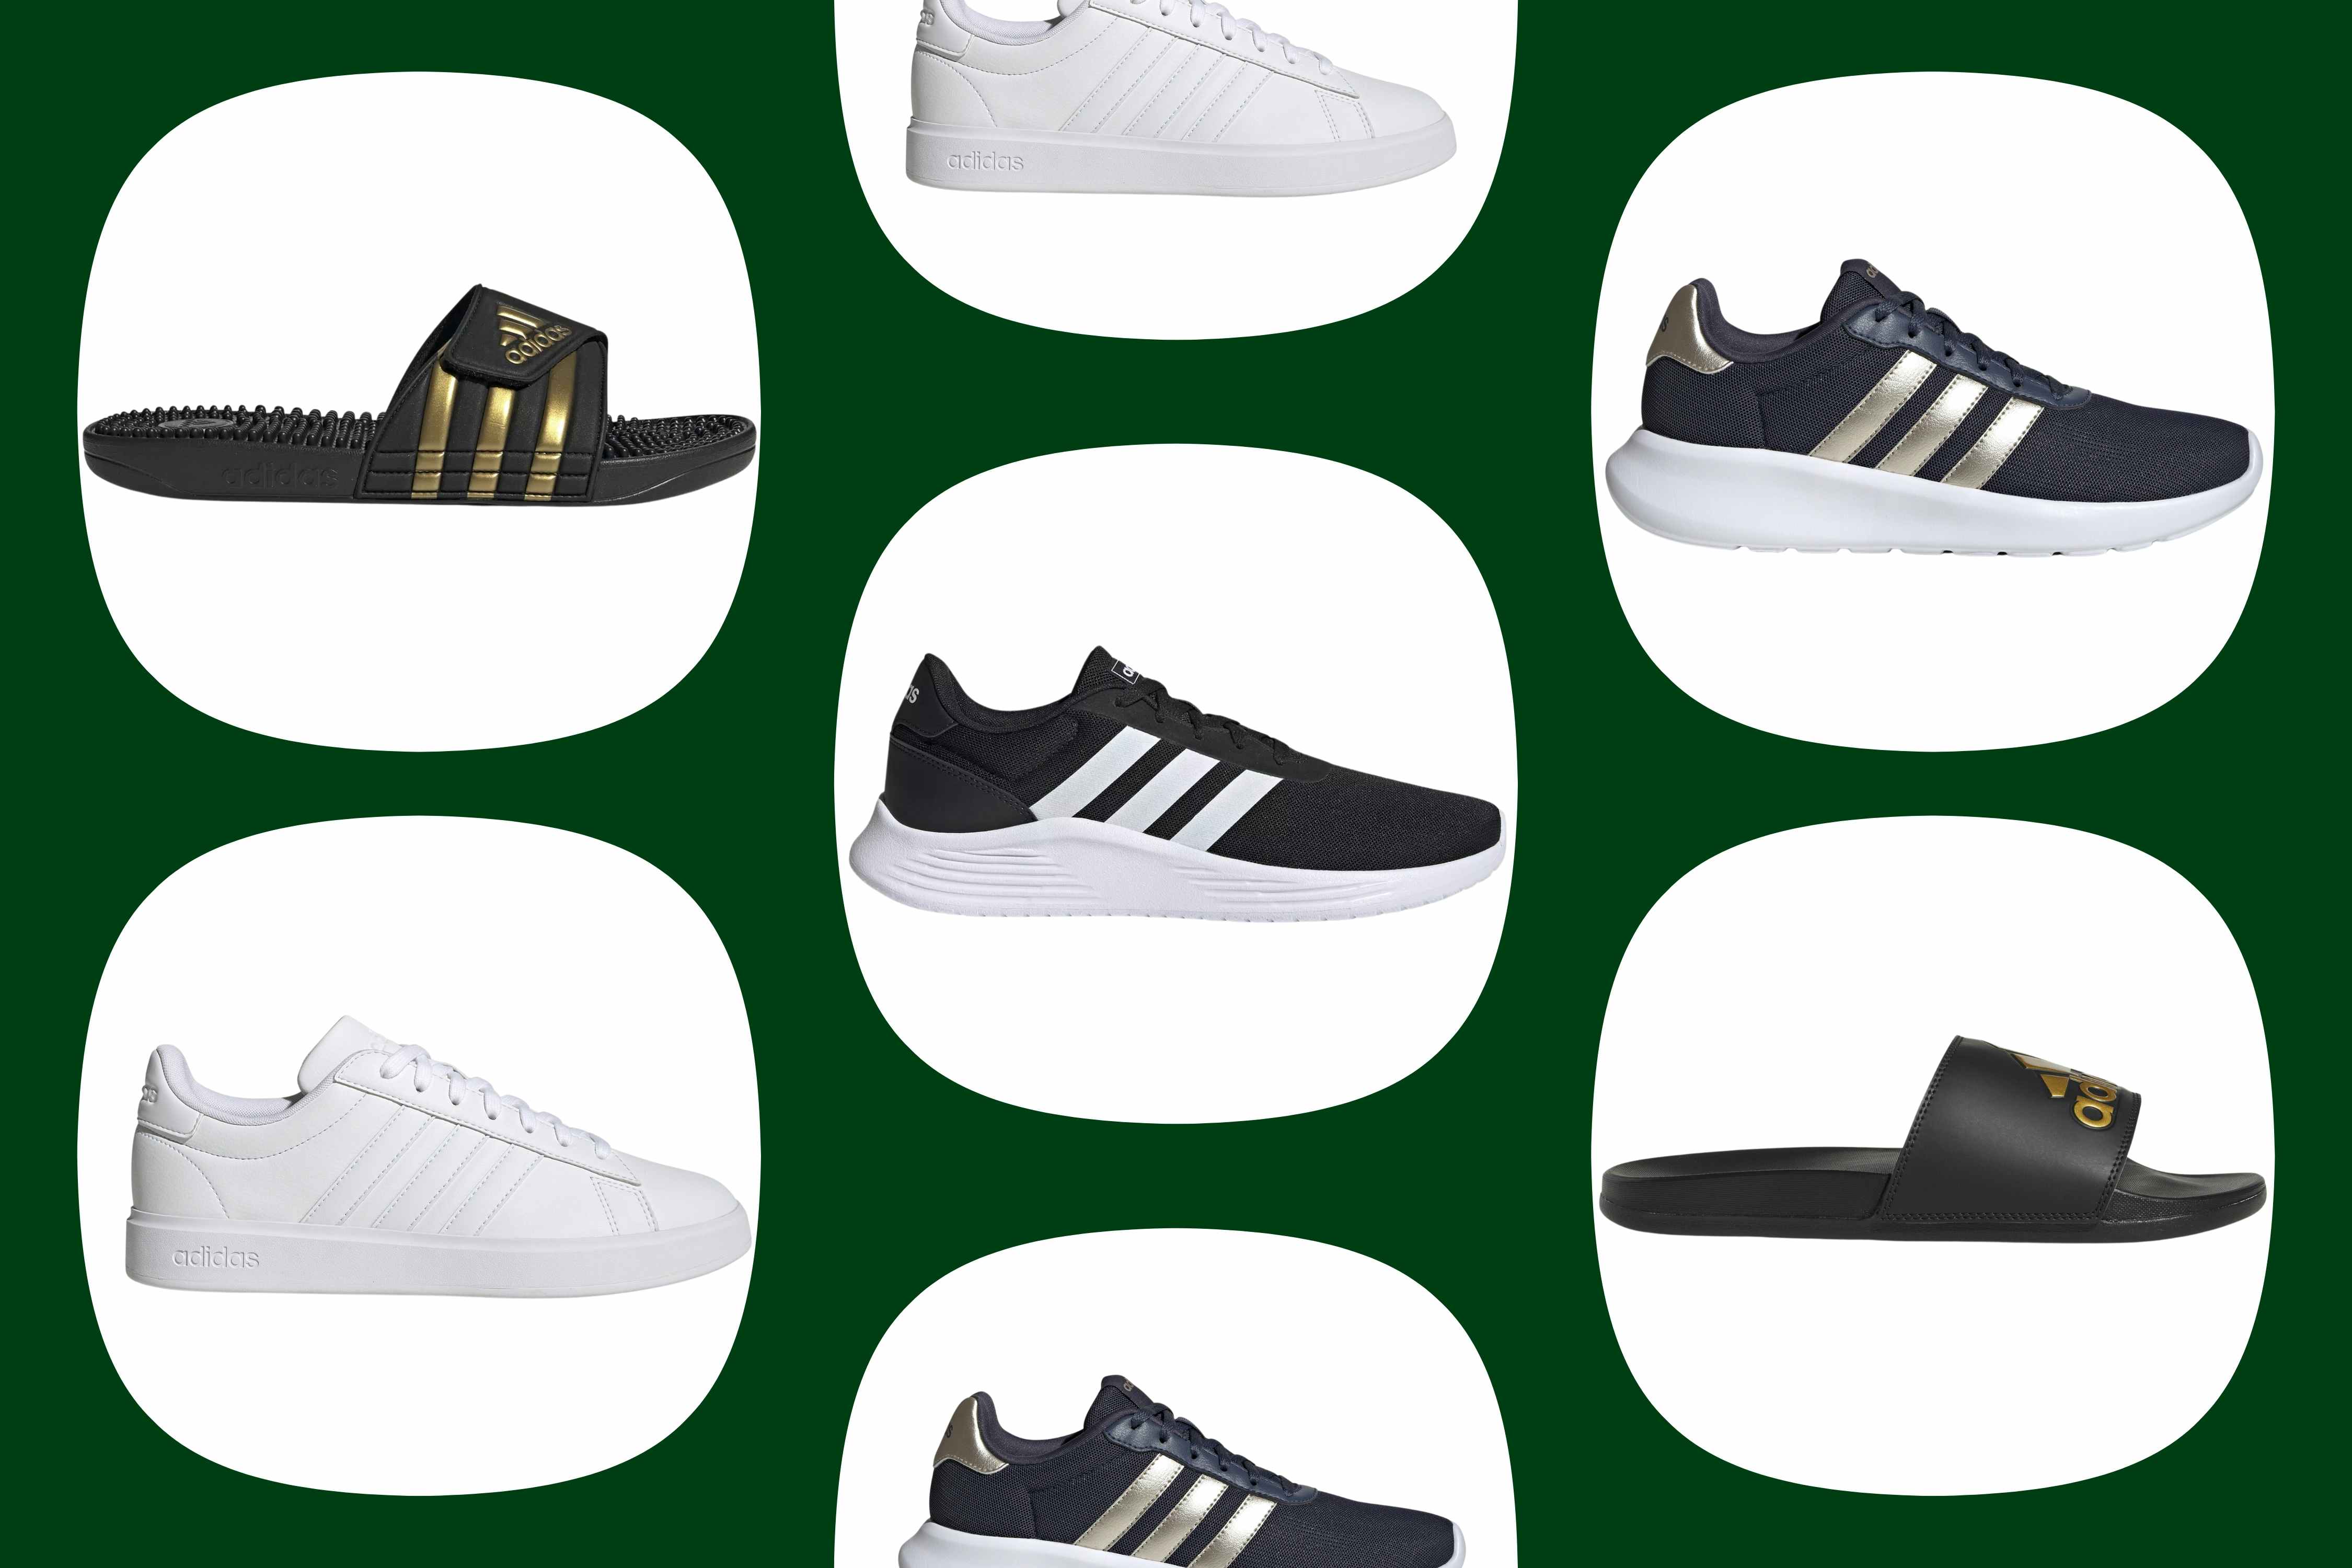 Huge Adidas at eBay: $17 Men's Slides, $21 Women's Sneakers, and More